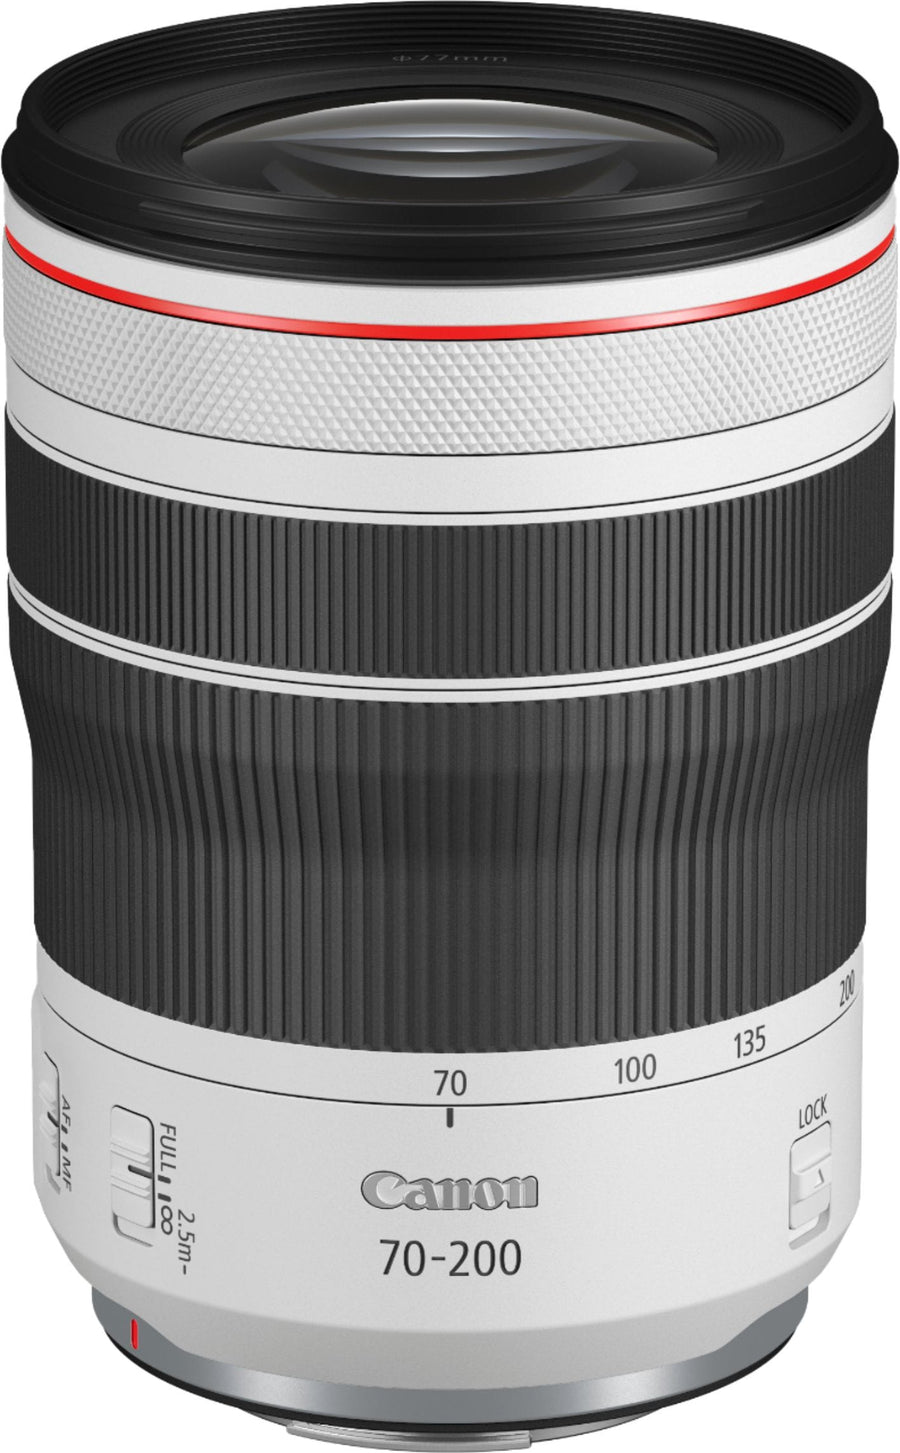 Canon - RF 70-200mm f/4 L IS USM Telephoto Zoom Lens for RF Mount Cameras - White_0